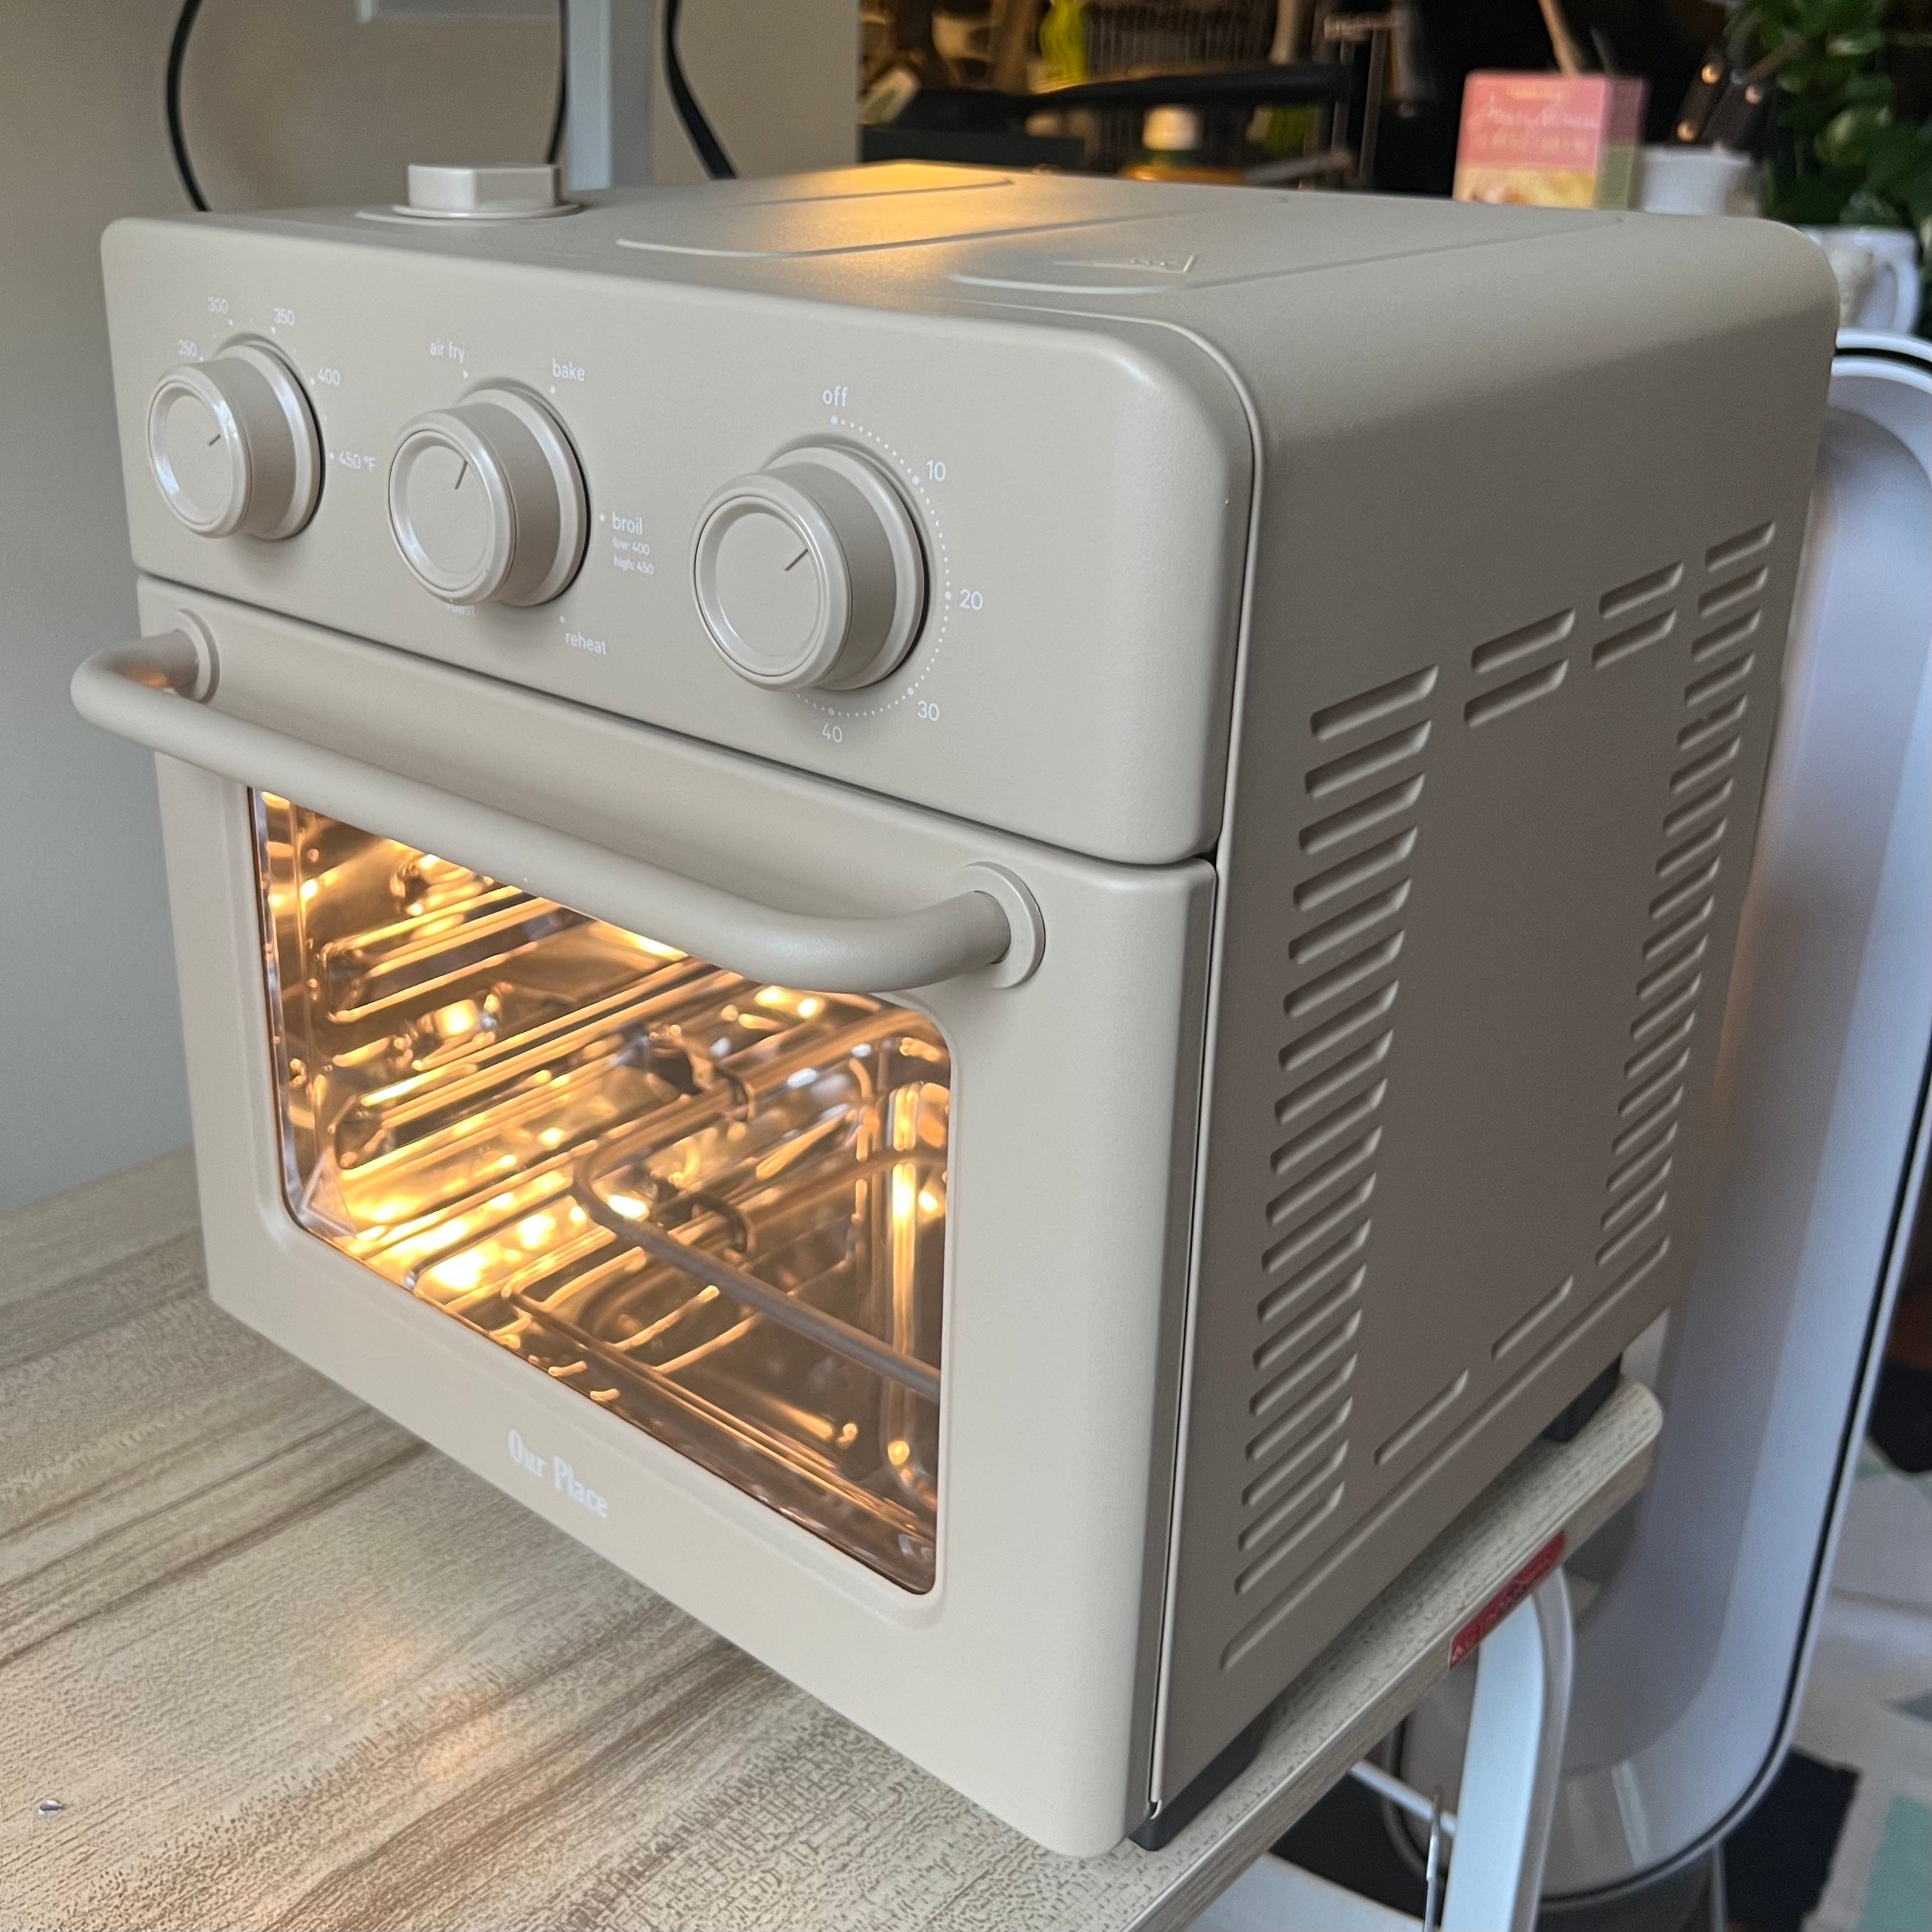 Our Place Releases the Wonder Oven: Our First Impressions